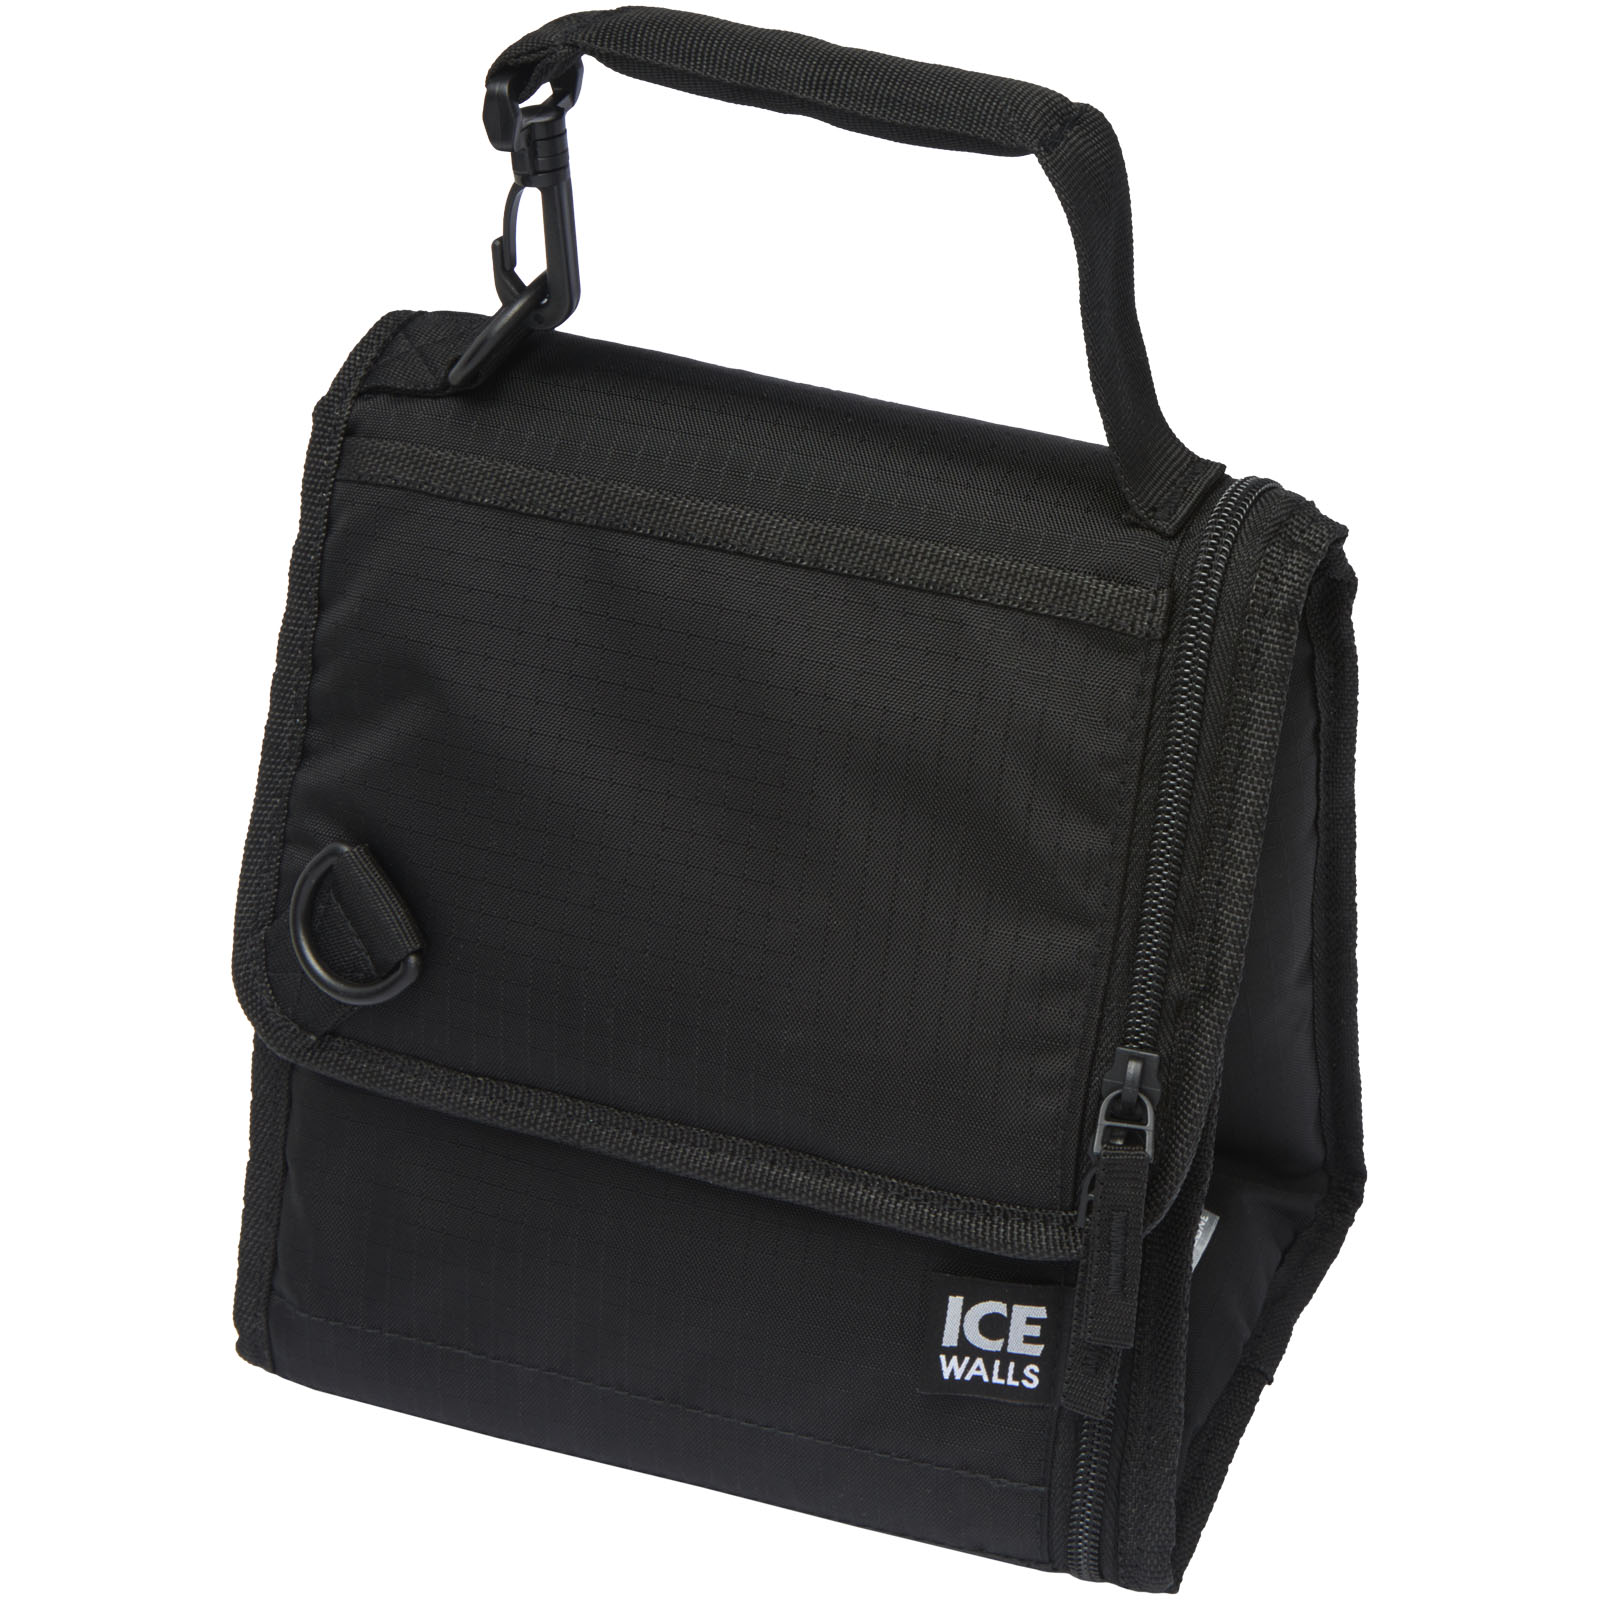 Bags - Arctic Zone® Ice-wall lunch cooler bag 7L